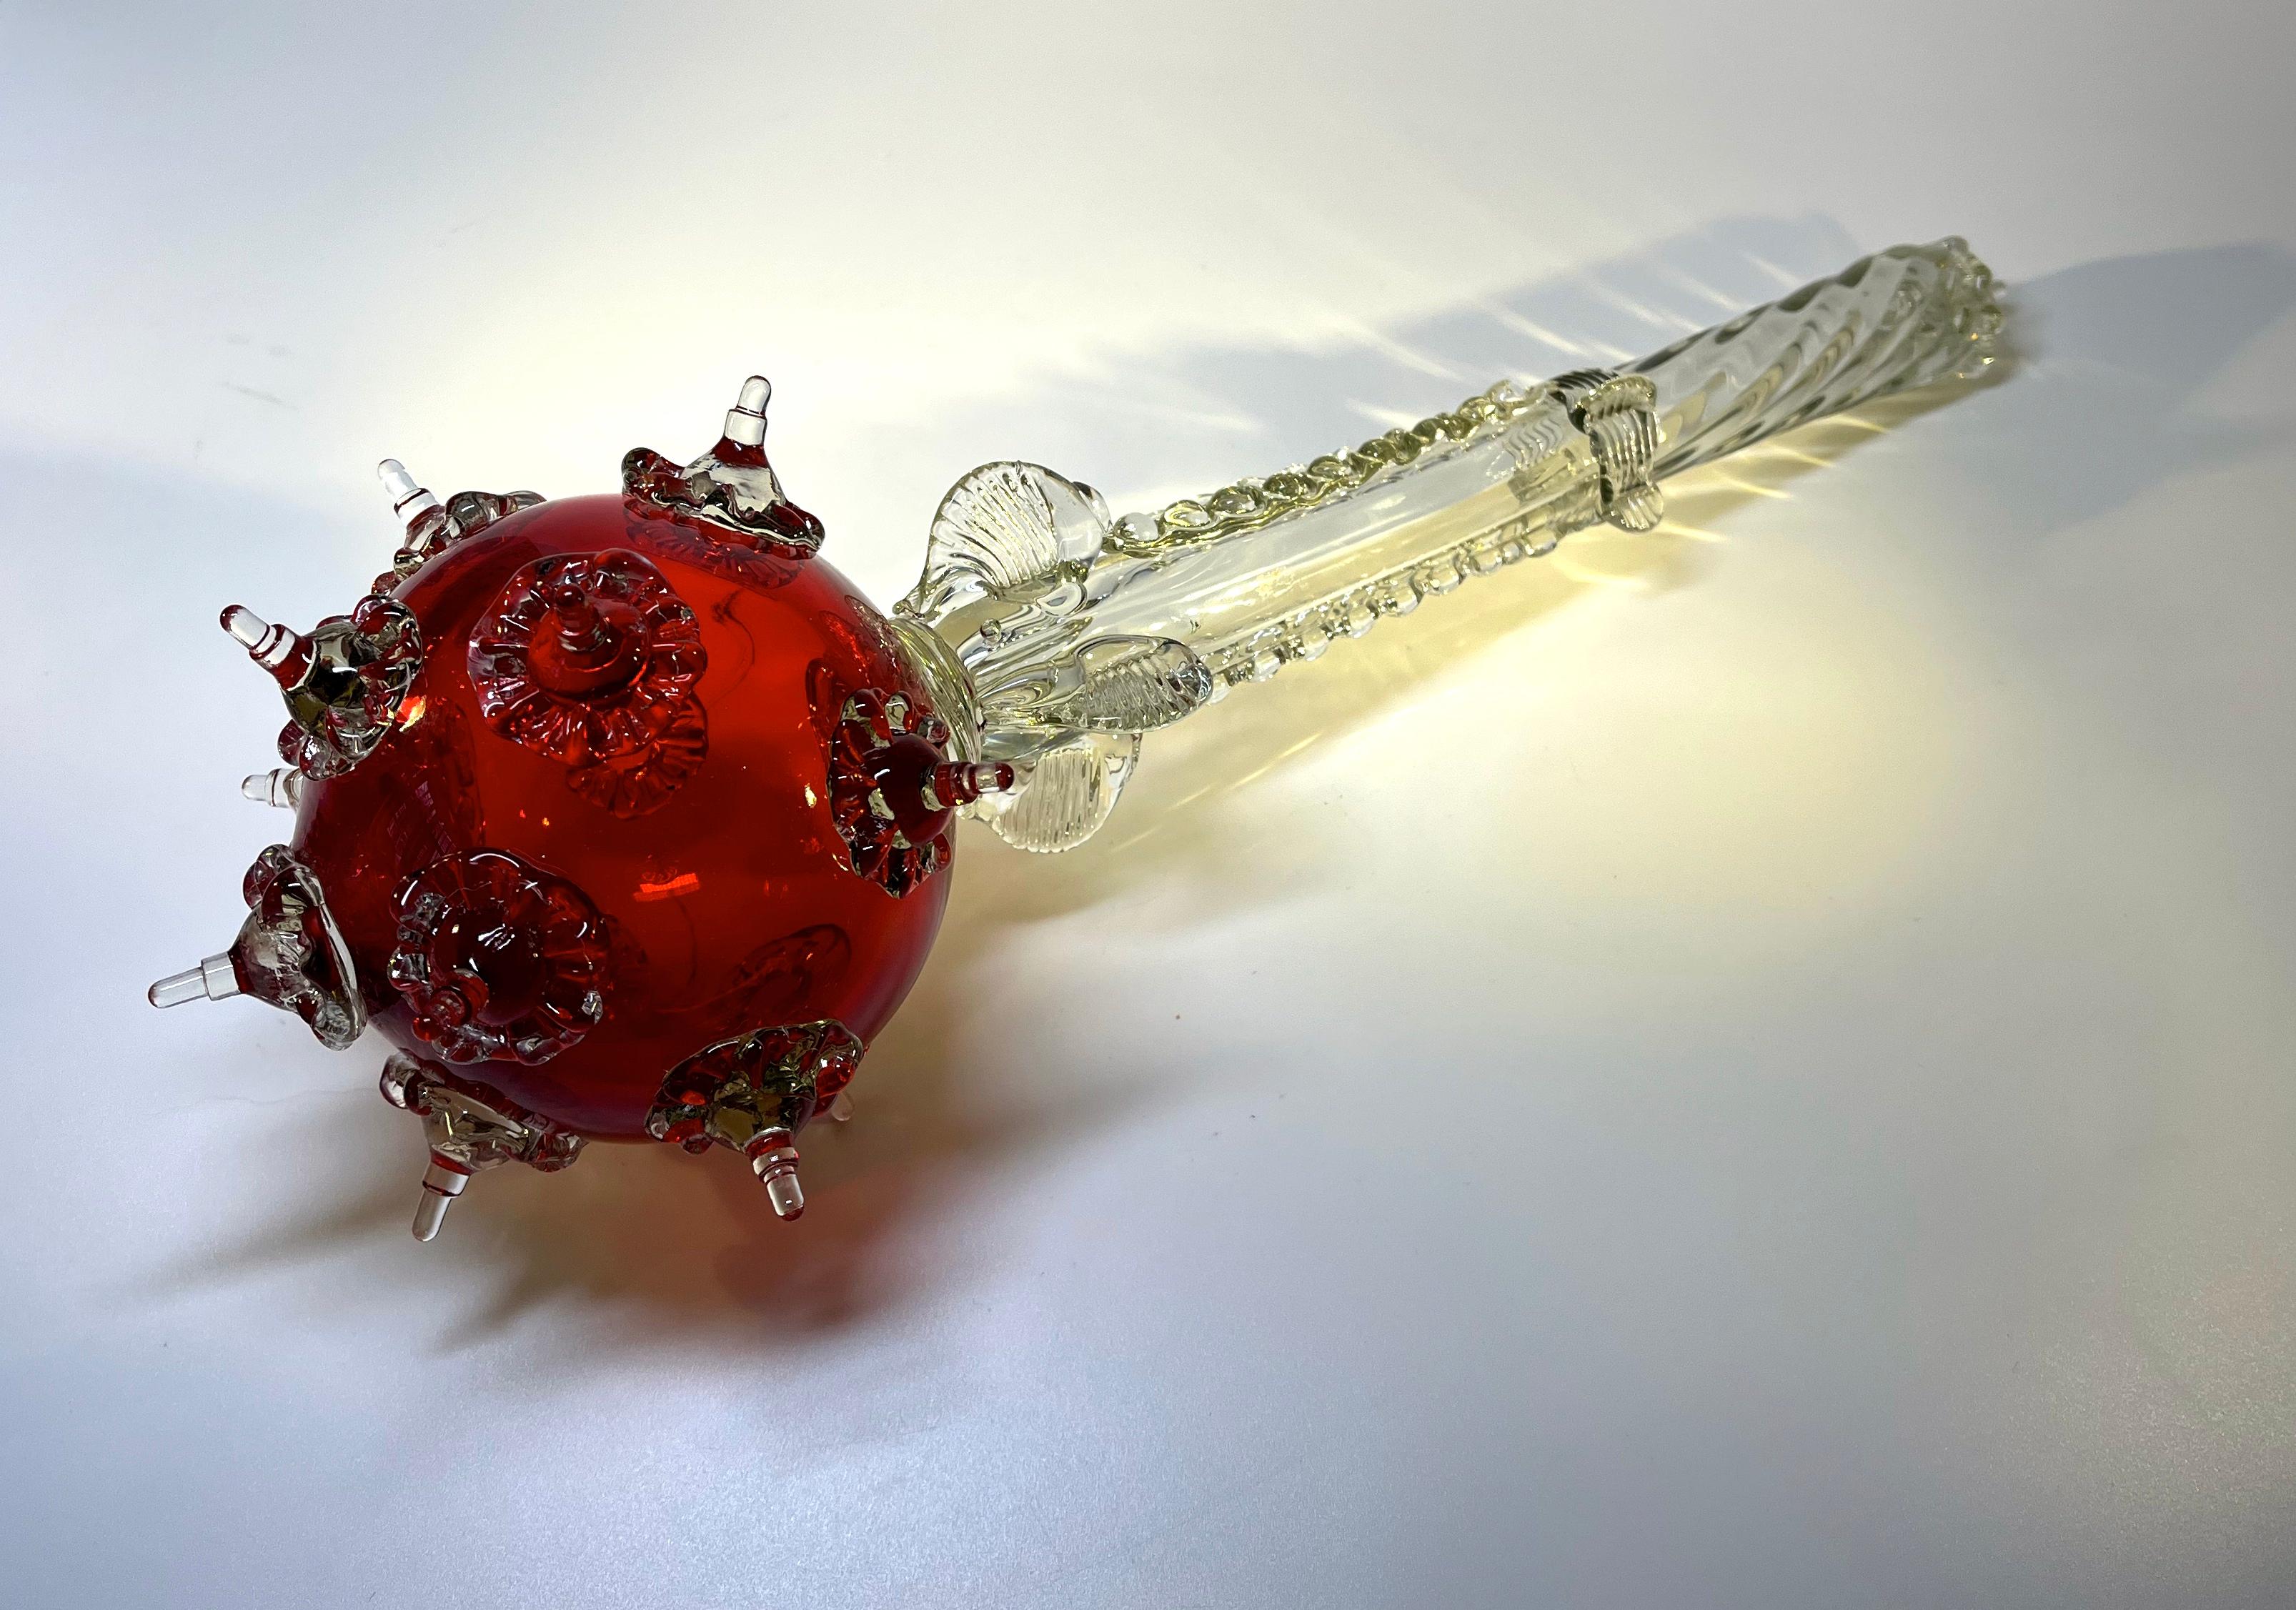 Elaborate and beautifully created ruby red glass sceptre
An striking piece of Murano for the collector
Circa 1970's 
Measures: Length 16 inch, Diameter 5 inch
In good condition. Two issues, one point missing from sceptre head and a small wing